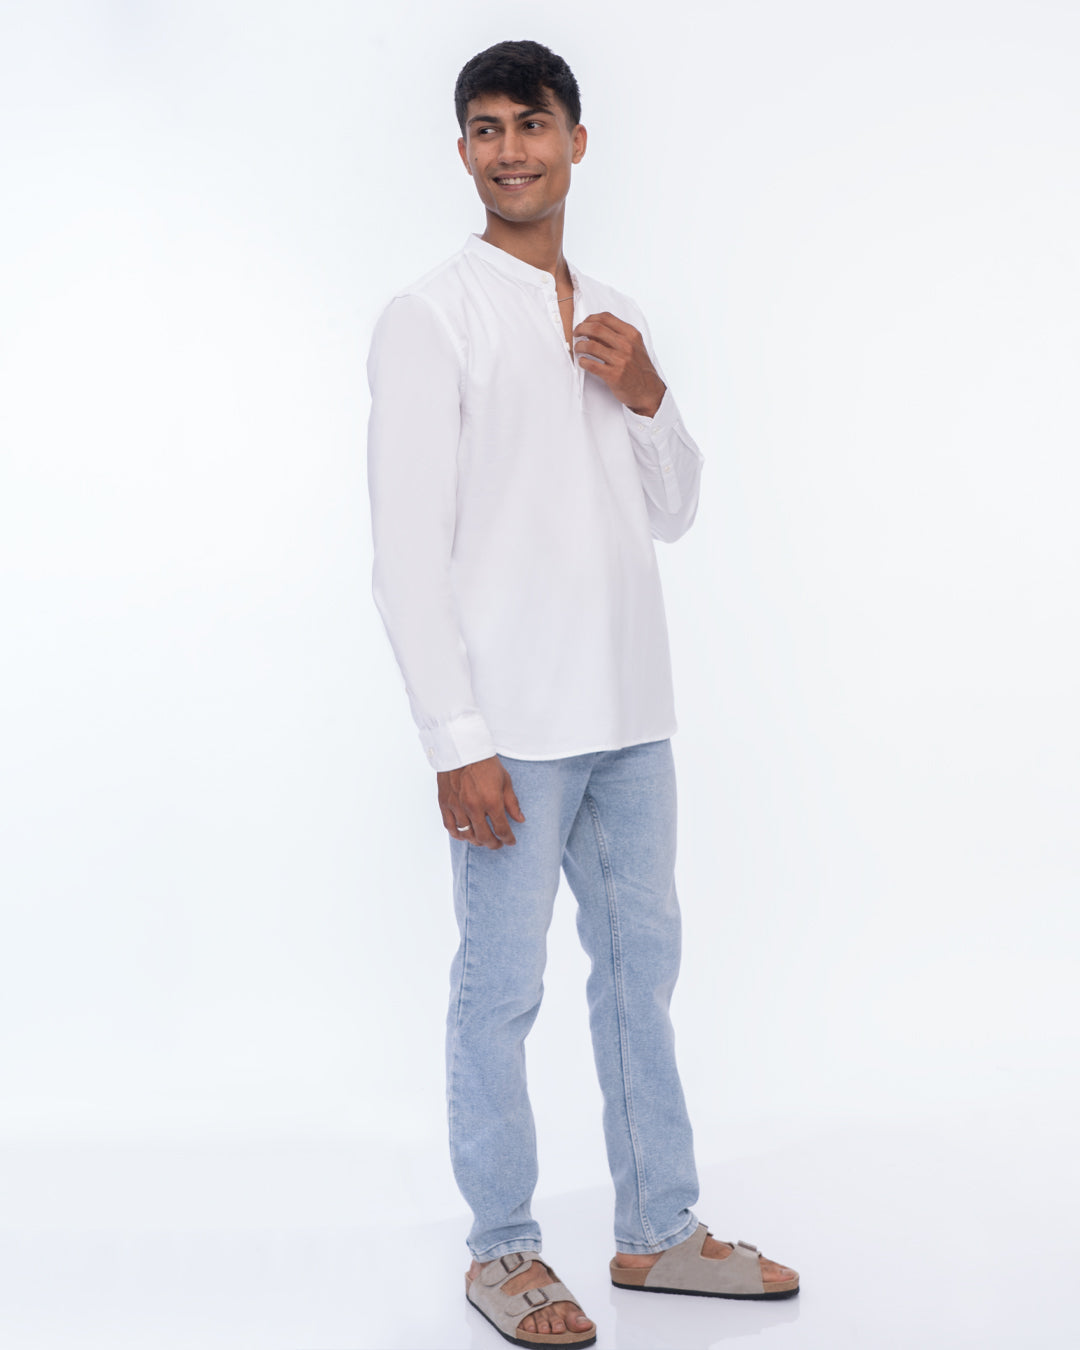 Comfortable white short kurta for men, ideal for casual and festive wear